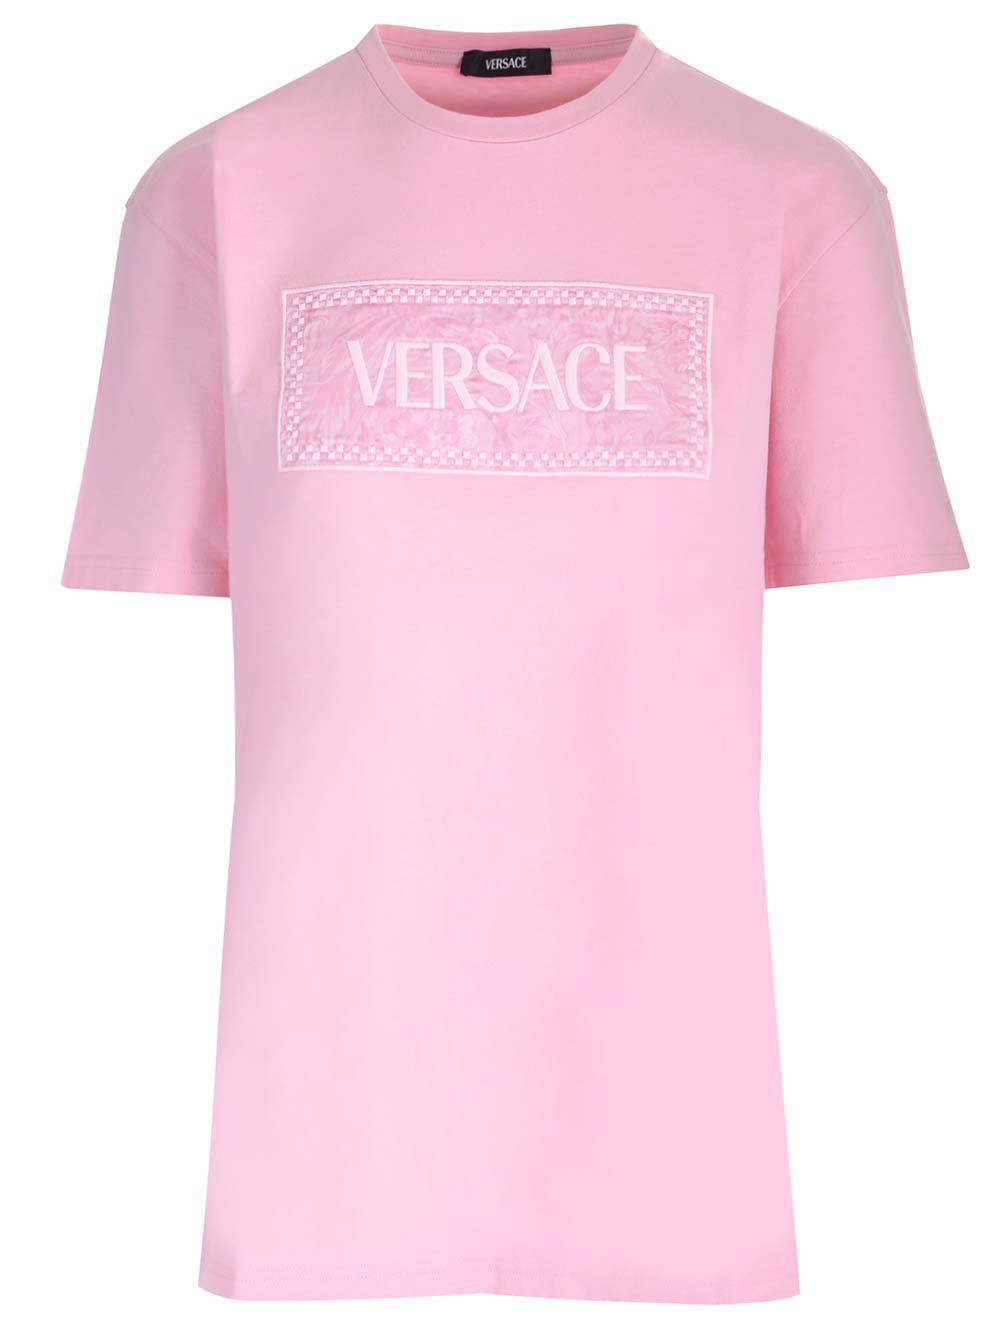 VERSACE EMBROIDERED BAROQUE T-SHIRT